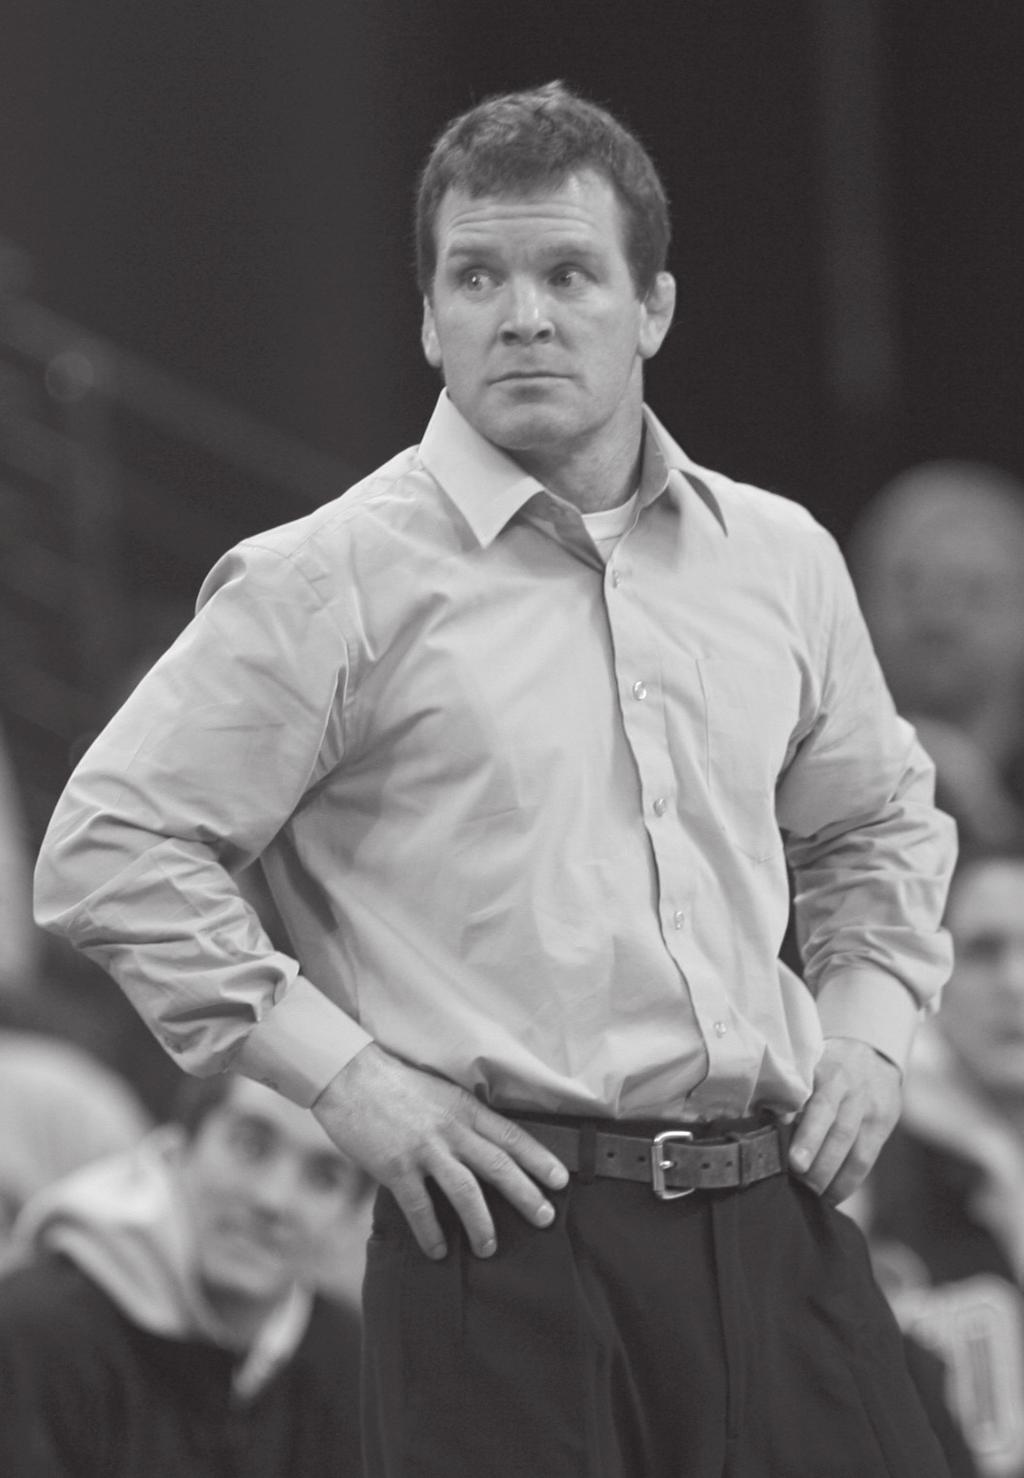 Assistant Coach Terry Brands Terry Brands Assistant Coach Two-time World Champion and 2000 Olympic bronze medalist Terry Brands is in his fifth season as an assistant coach at the University of Iowa.